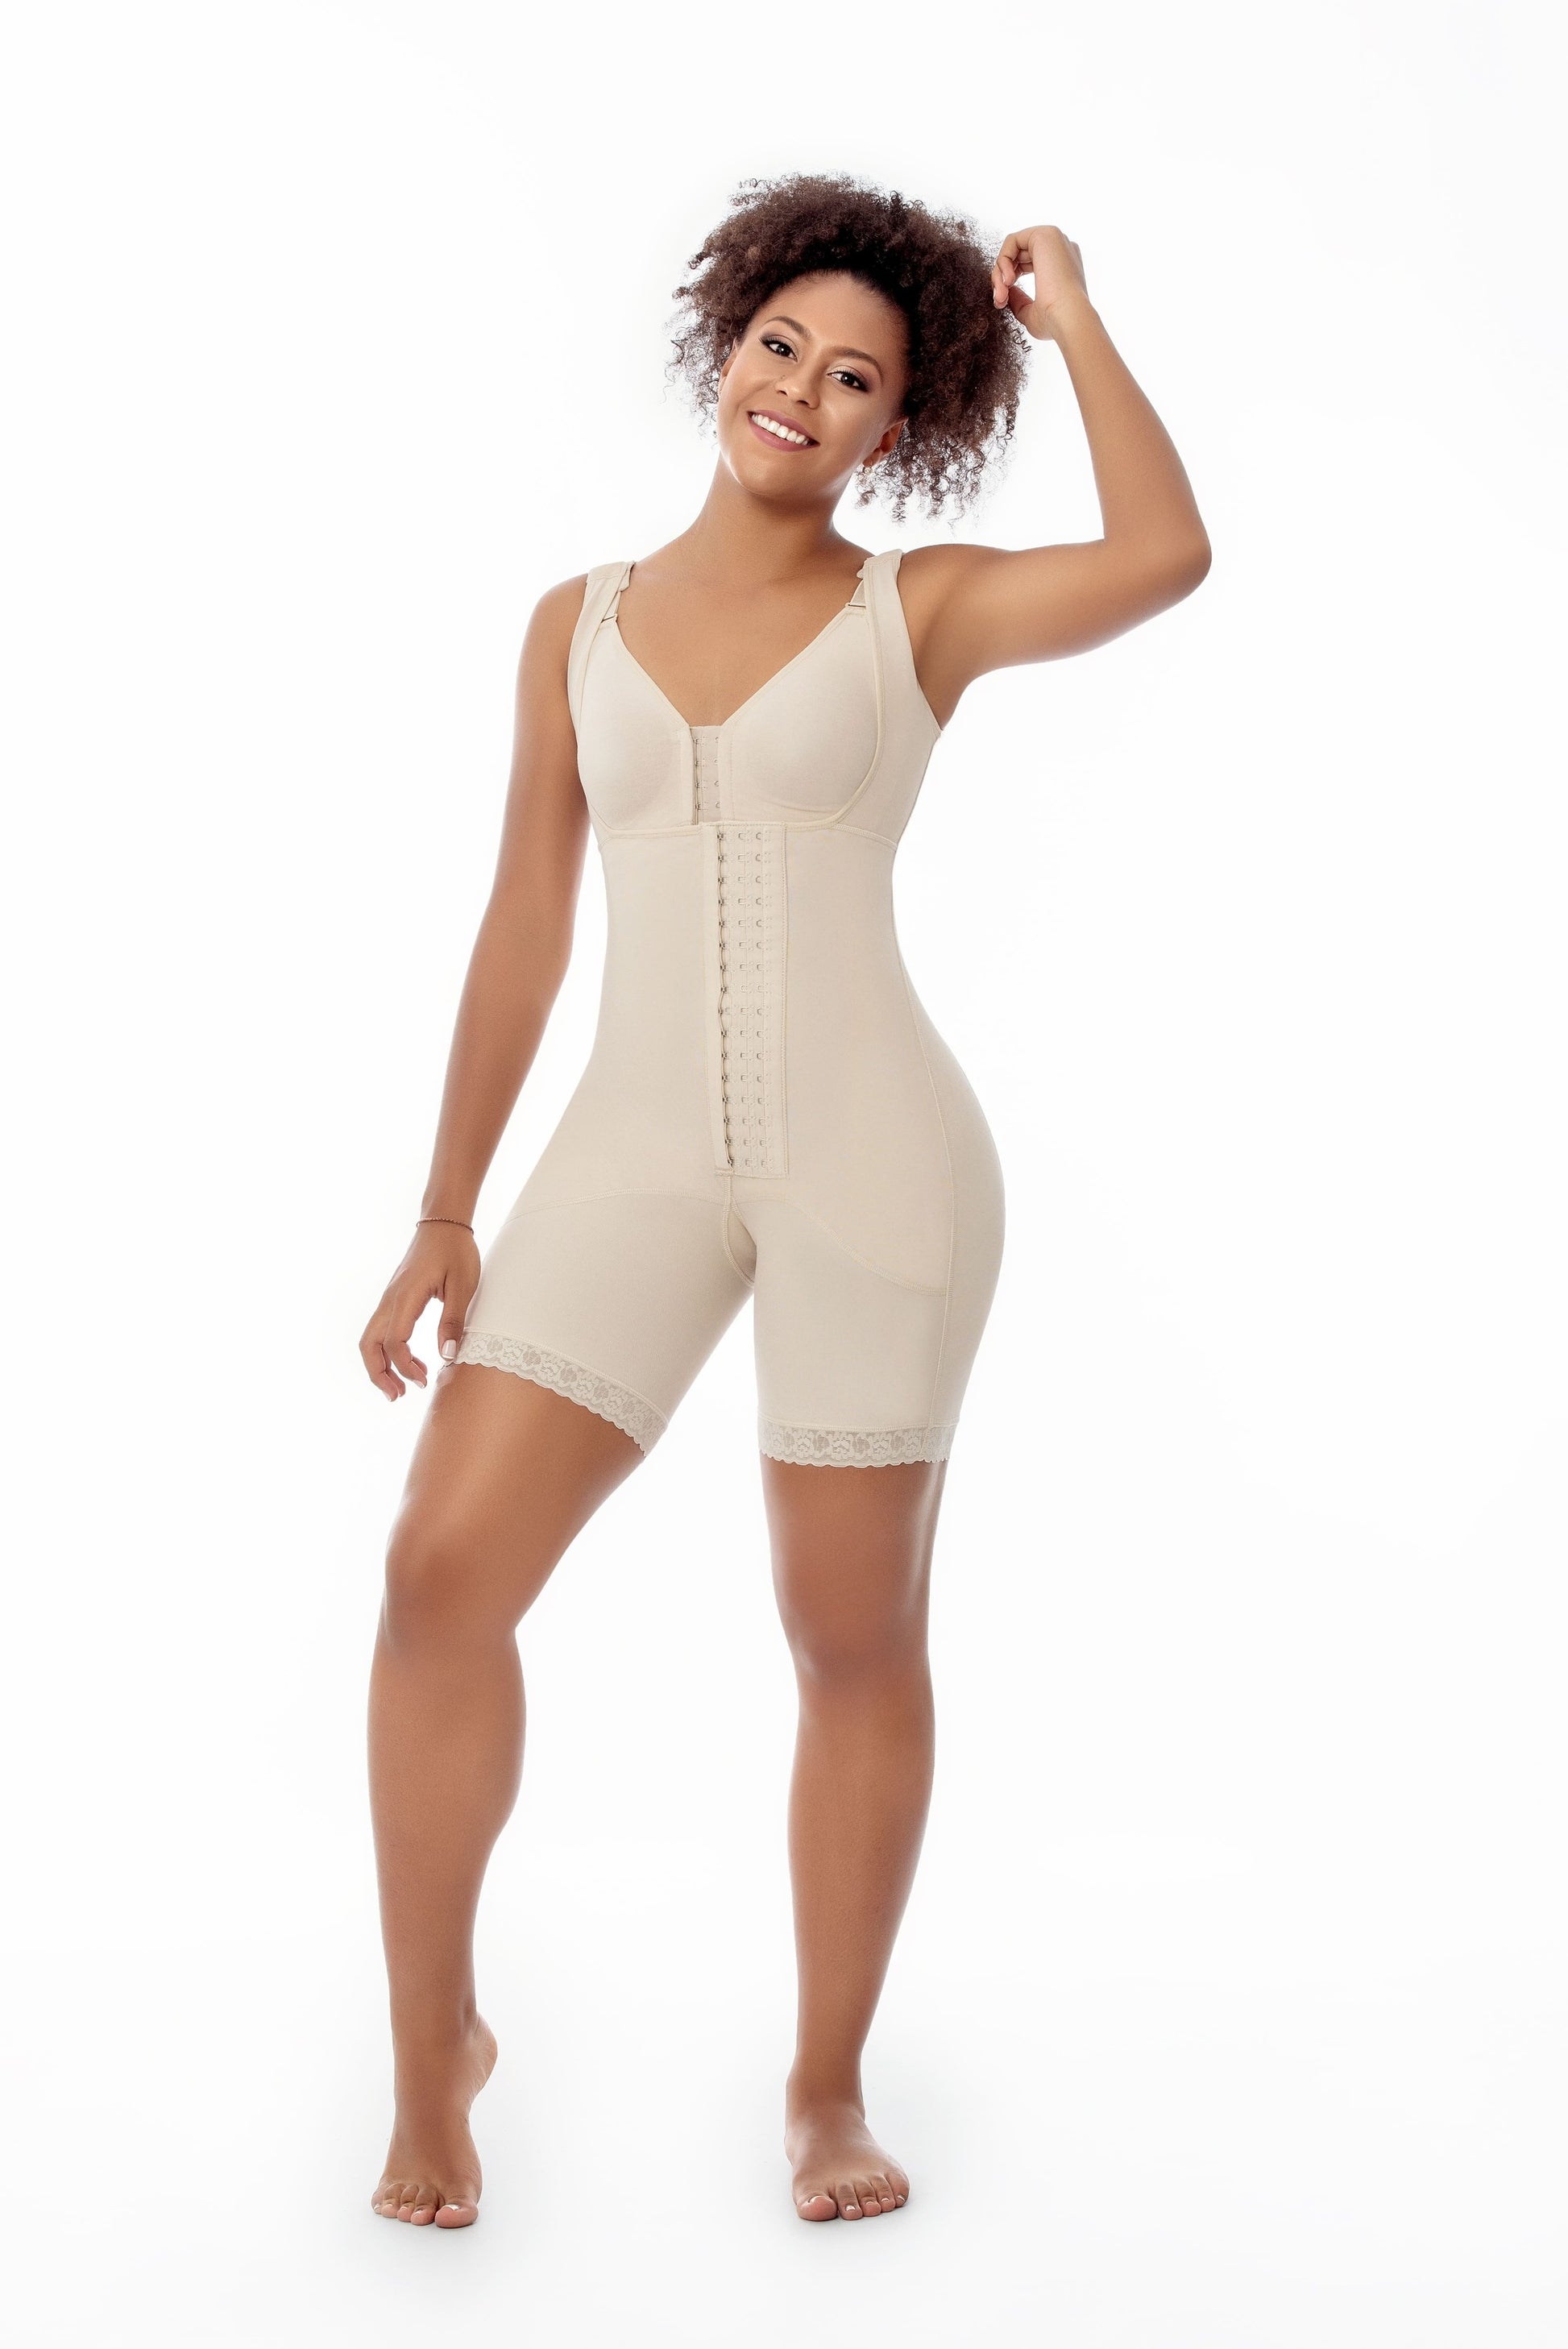 Braless full body above knee faja with sleeves and hook closure